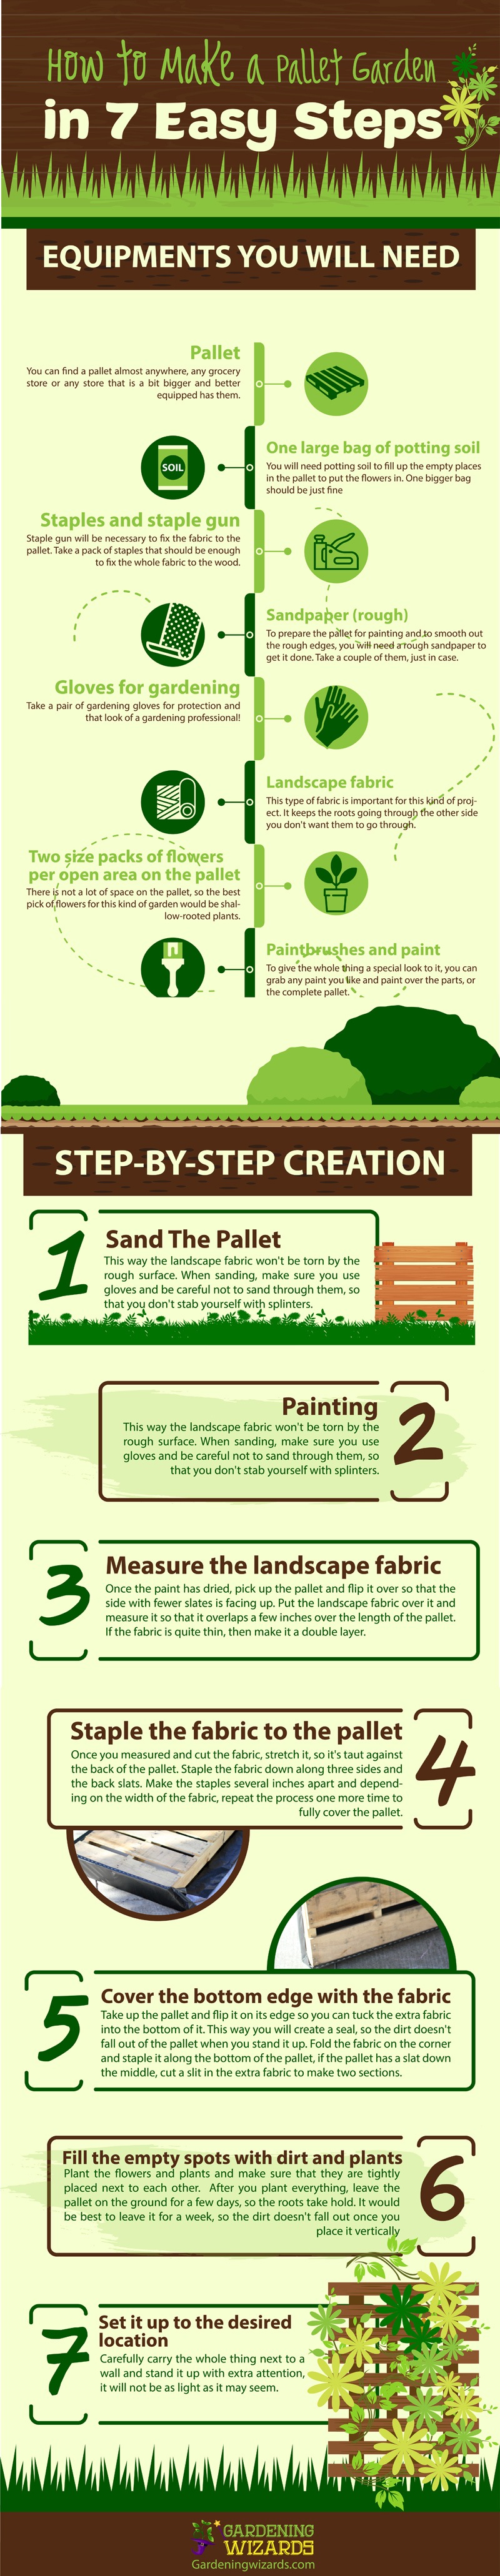 Infographic How to Make a Pallet Garden in 7 Easy Steps